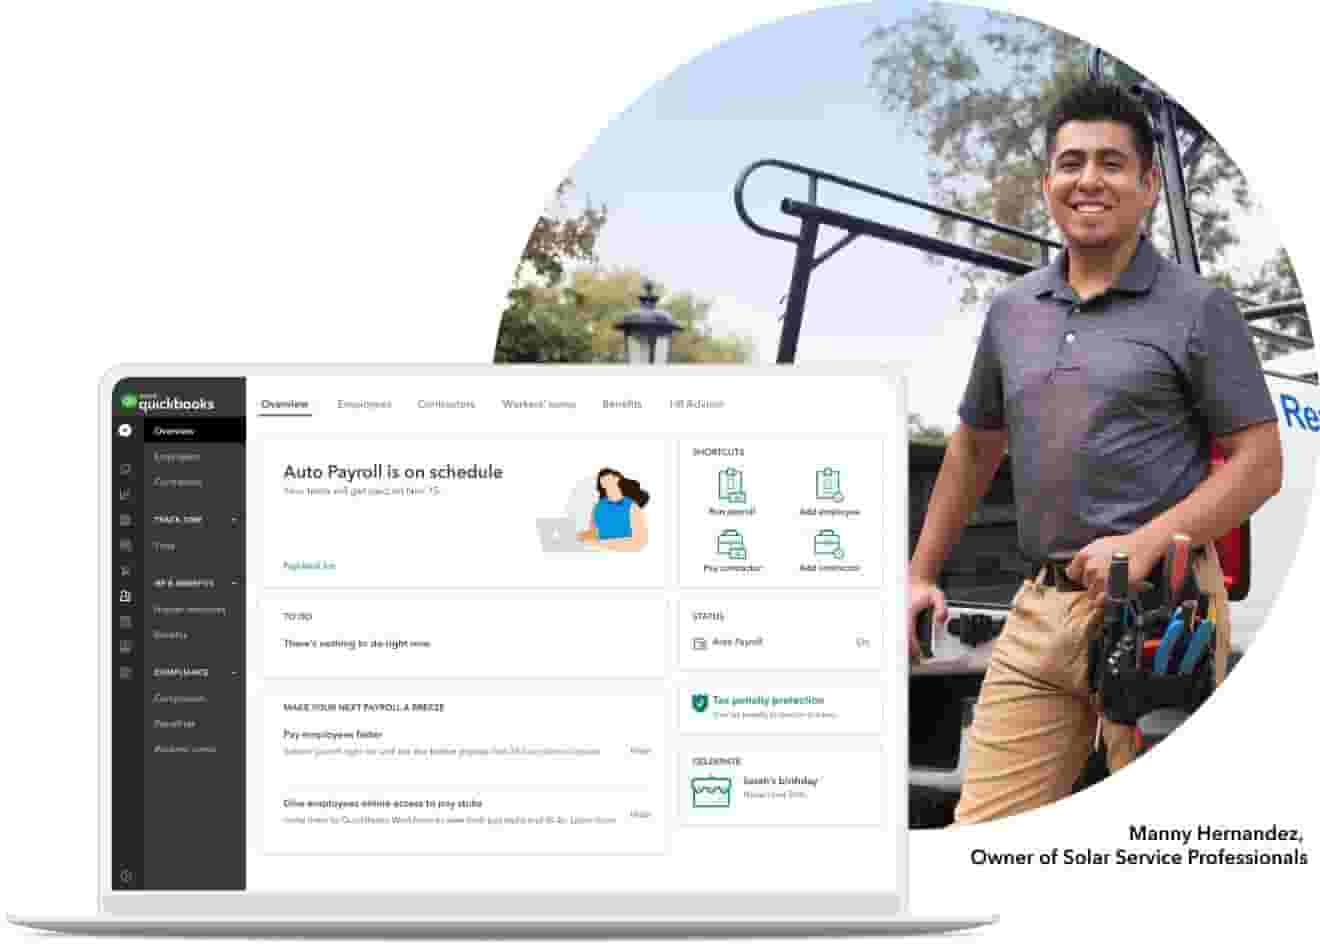 An illustration of a laptop displaying the Payroll overview page in the QuickBooks Online platform. Beneath the illustration is a photo of a person standing outside, wearing a tool belt, smiling at the camera.